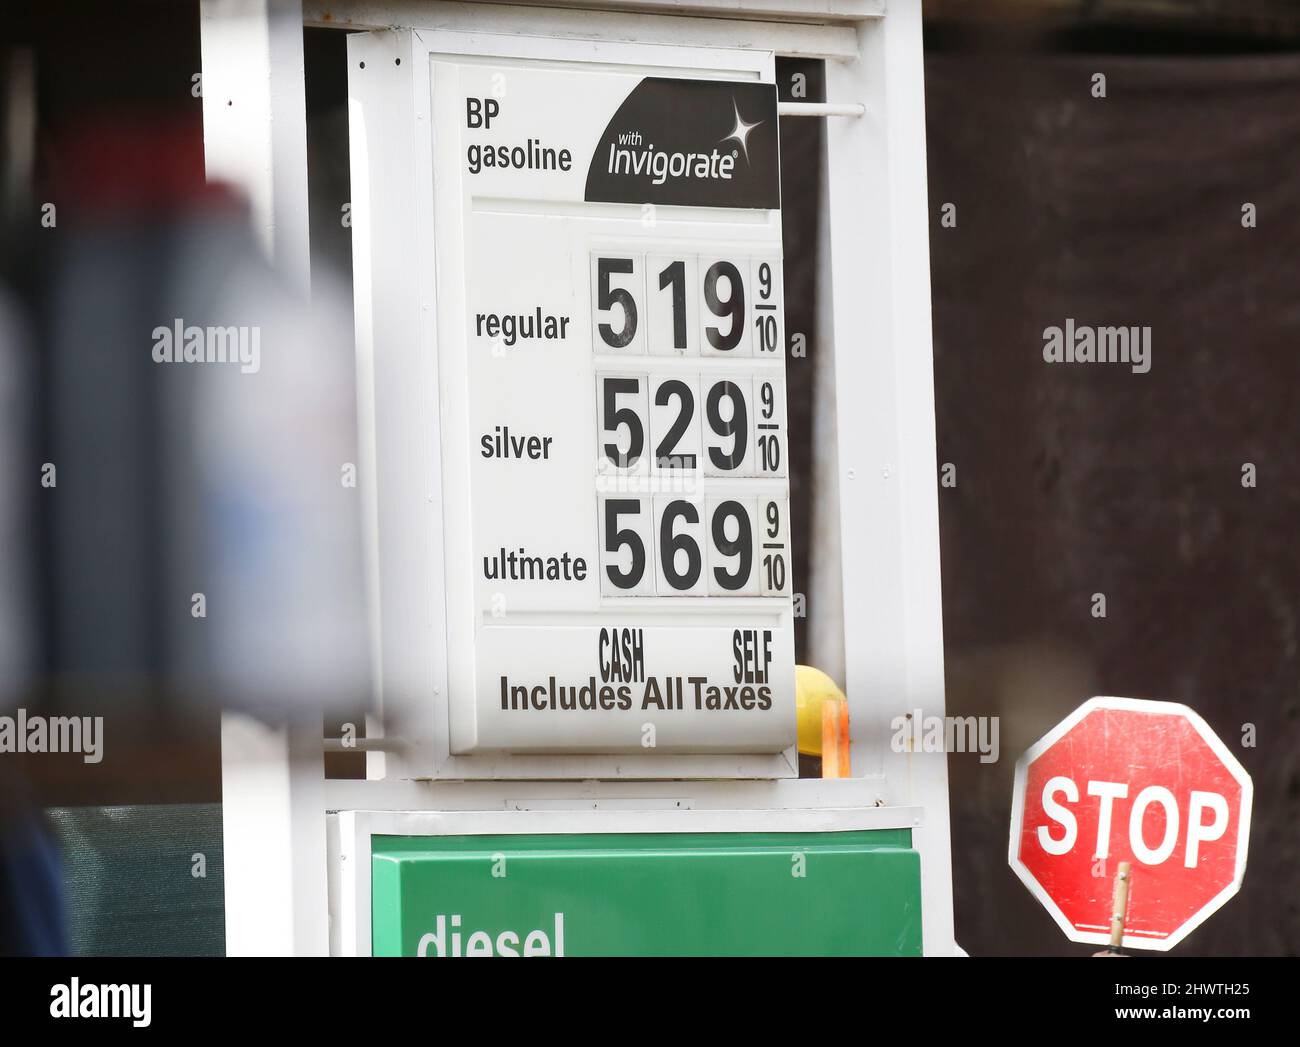 New York, United States. 07th Mar, 2022. The price for a gallon of gasoline surpasses 5 dollars a gallon at a Manhatan gas station in New York City on Monday, March 7, 2022. Since the Russia-Ukraine War the national average price of gasoline has just surpassed $4 a gallon in the U.S. for the first time since 2008. Photo by John Angelillo/UPI Credit: UPI/Alamy Live News Stock Photo